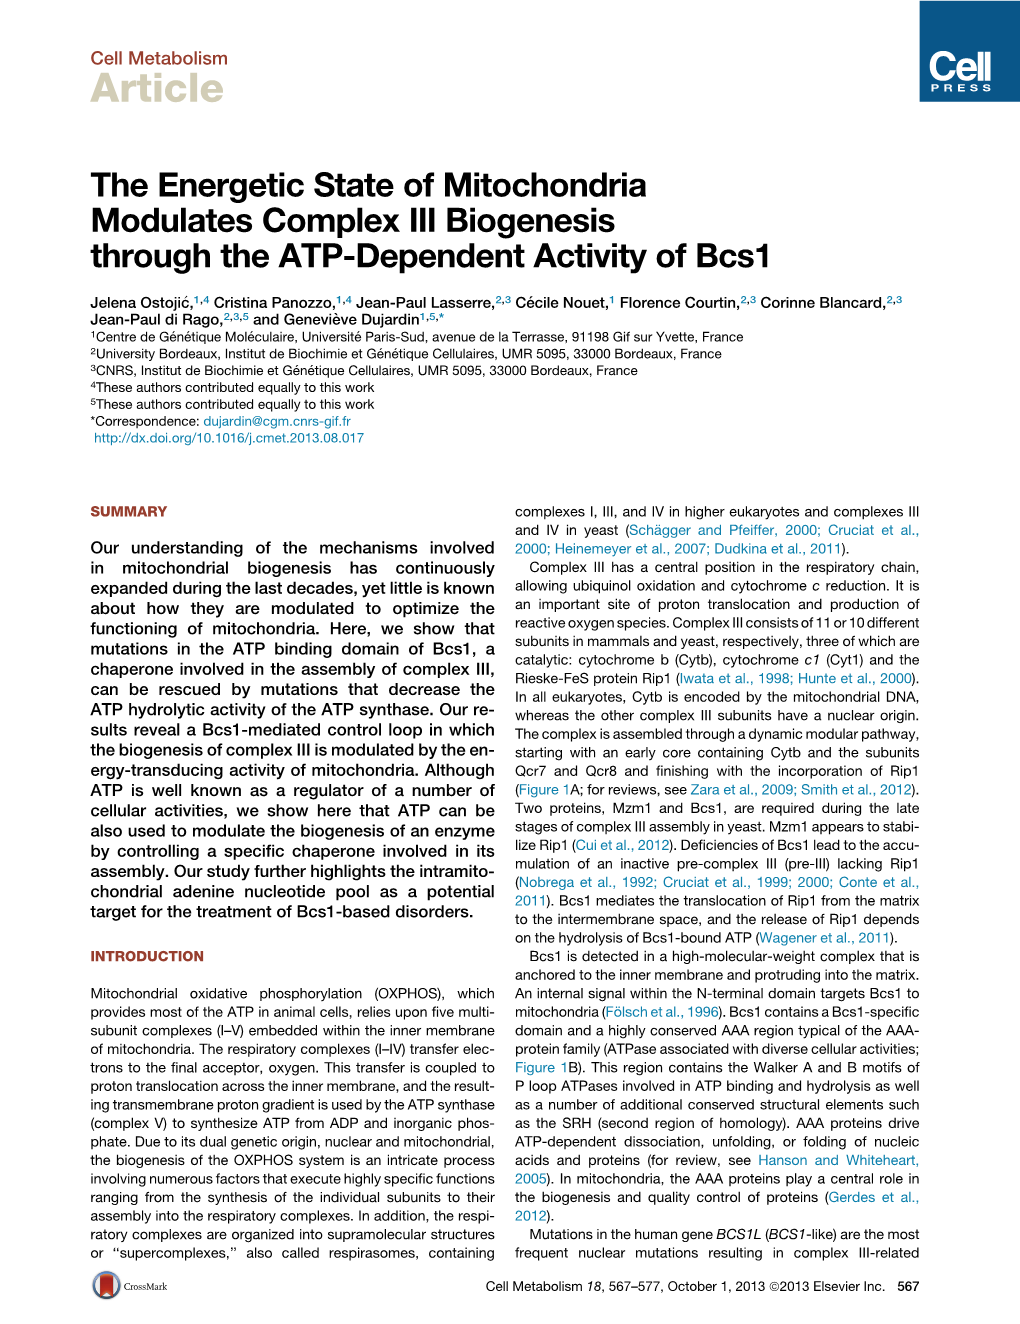 The Energetic State of Mitochondria Modulates Complex III Biogenesis Through the ATP-Dependent Activity of Bcs1